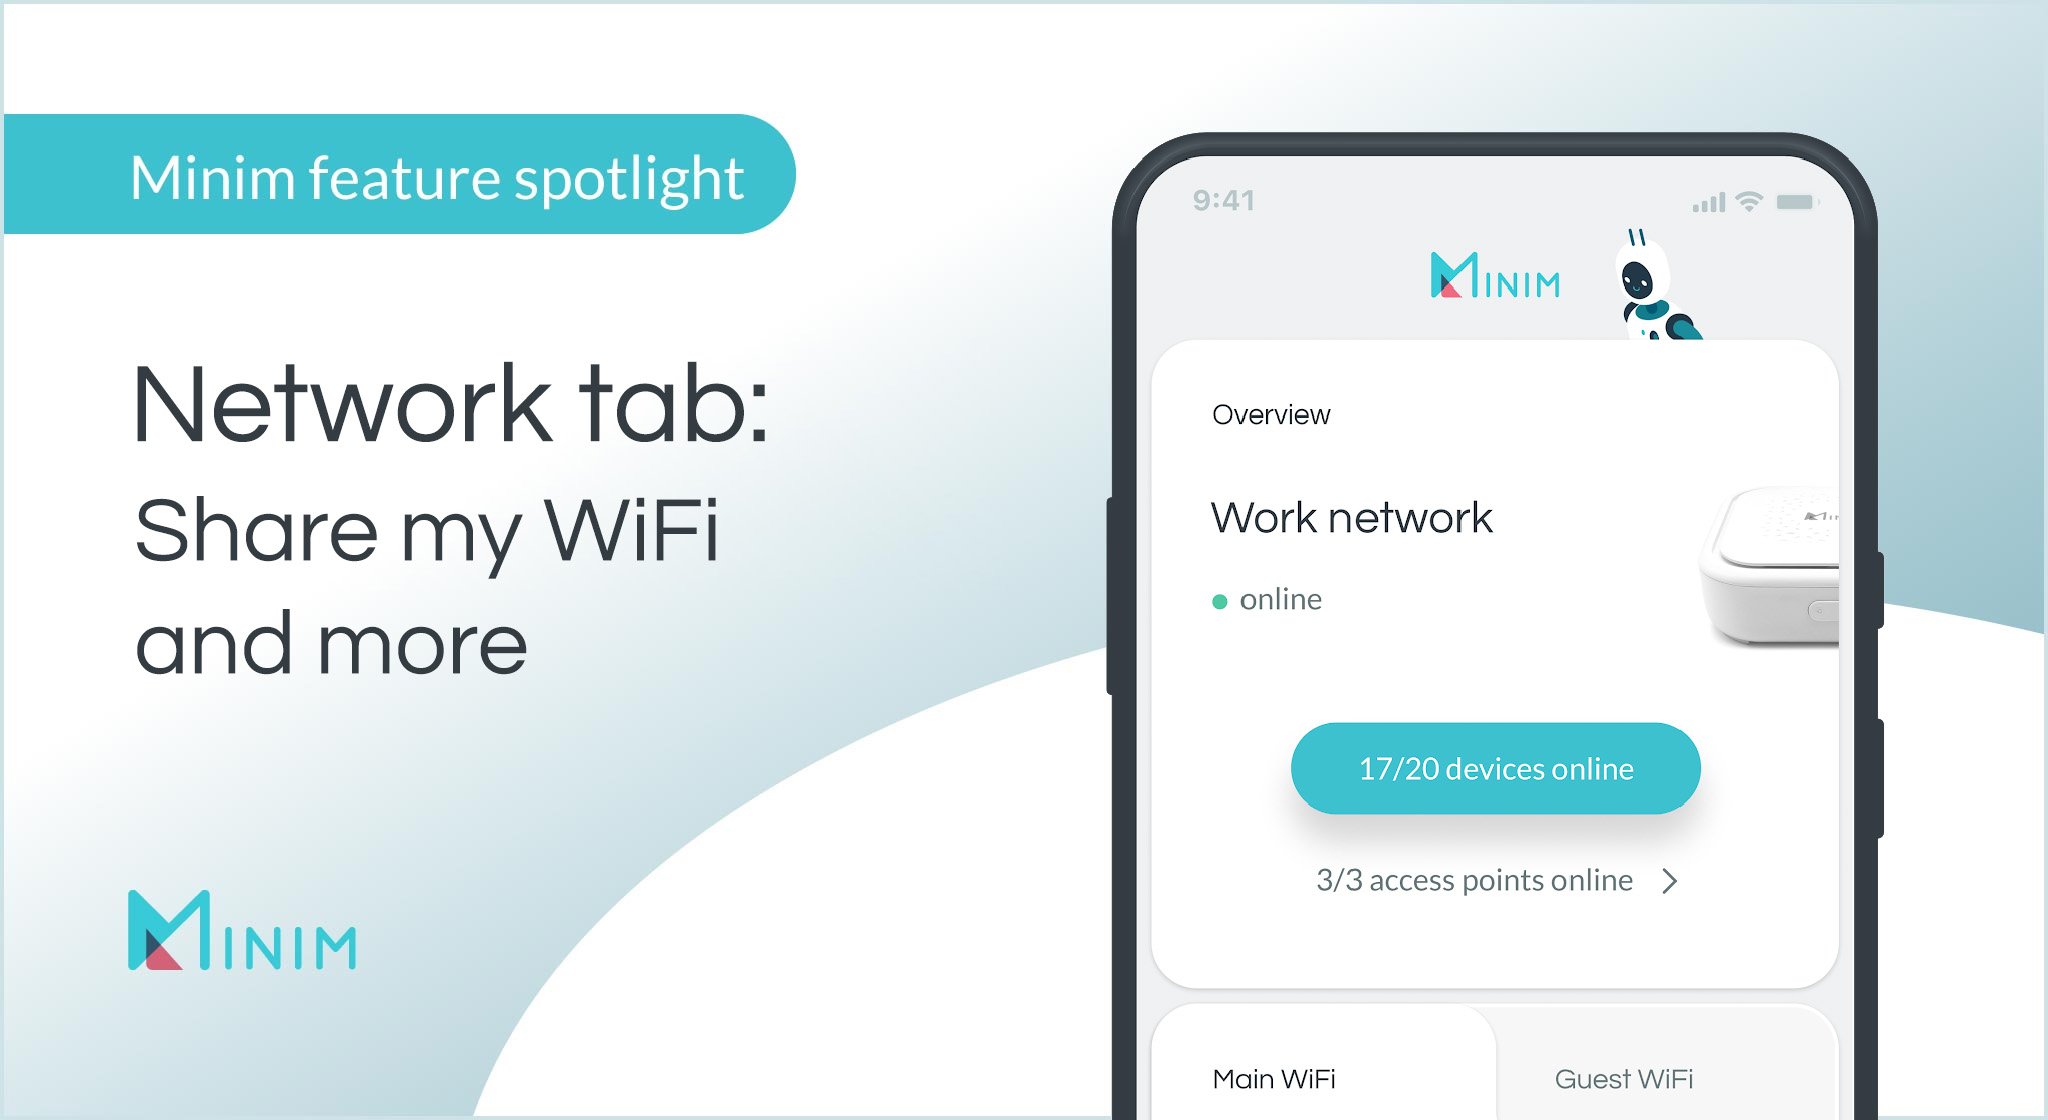 Network tab: share my WiFi and more